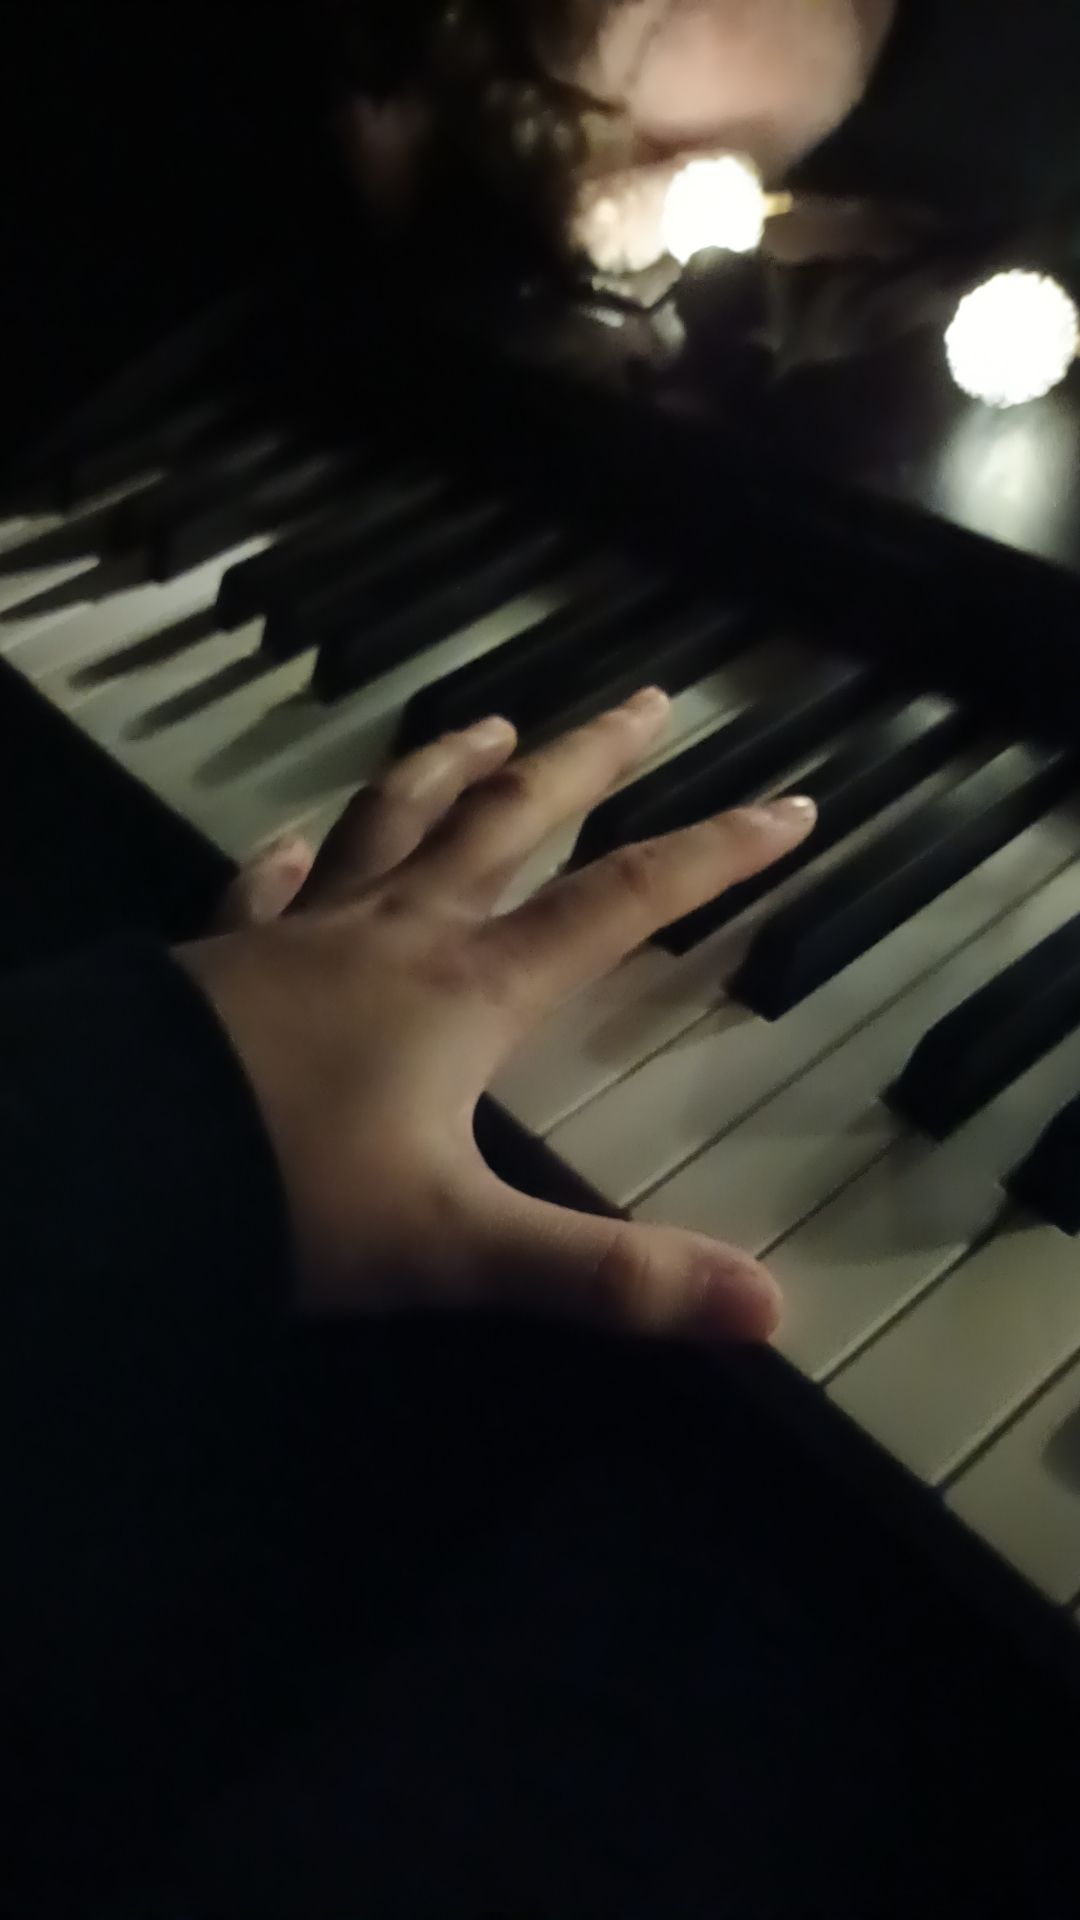 A person's hand on the keys of a piano. - Piano